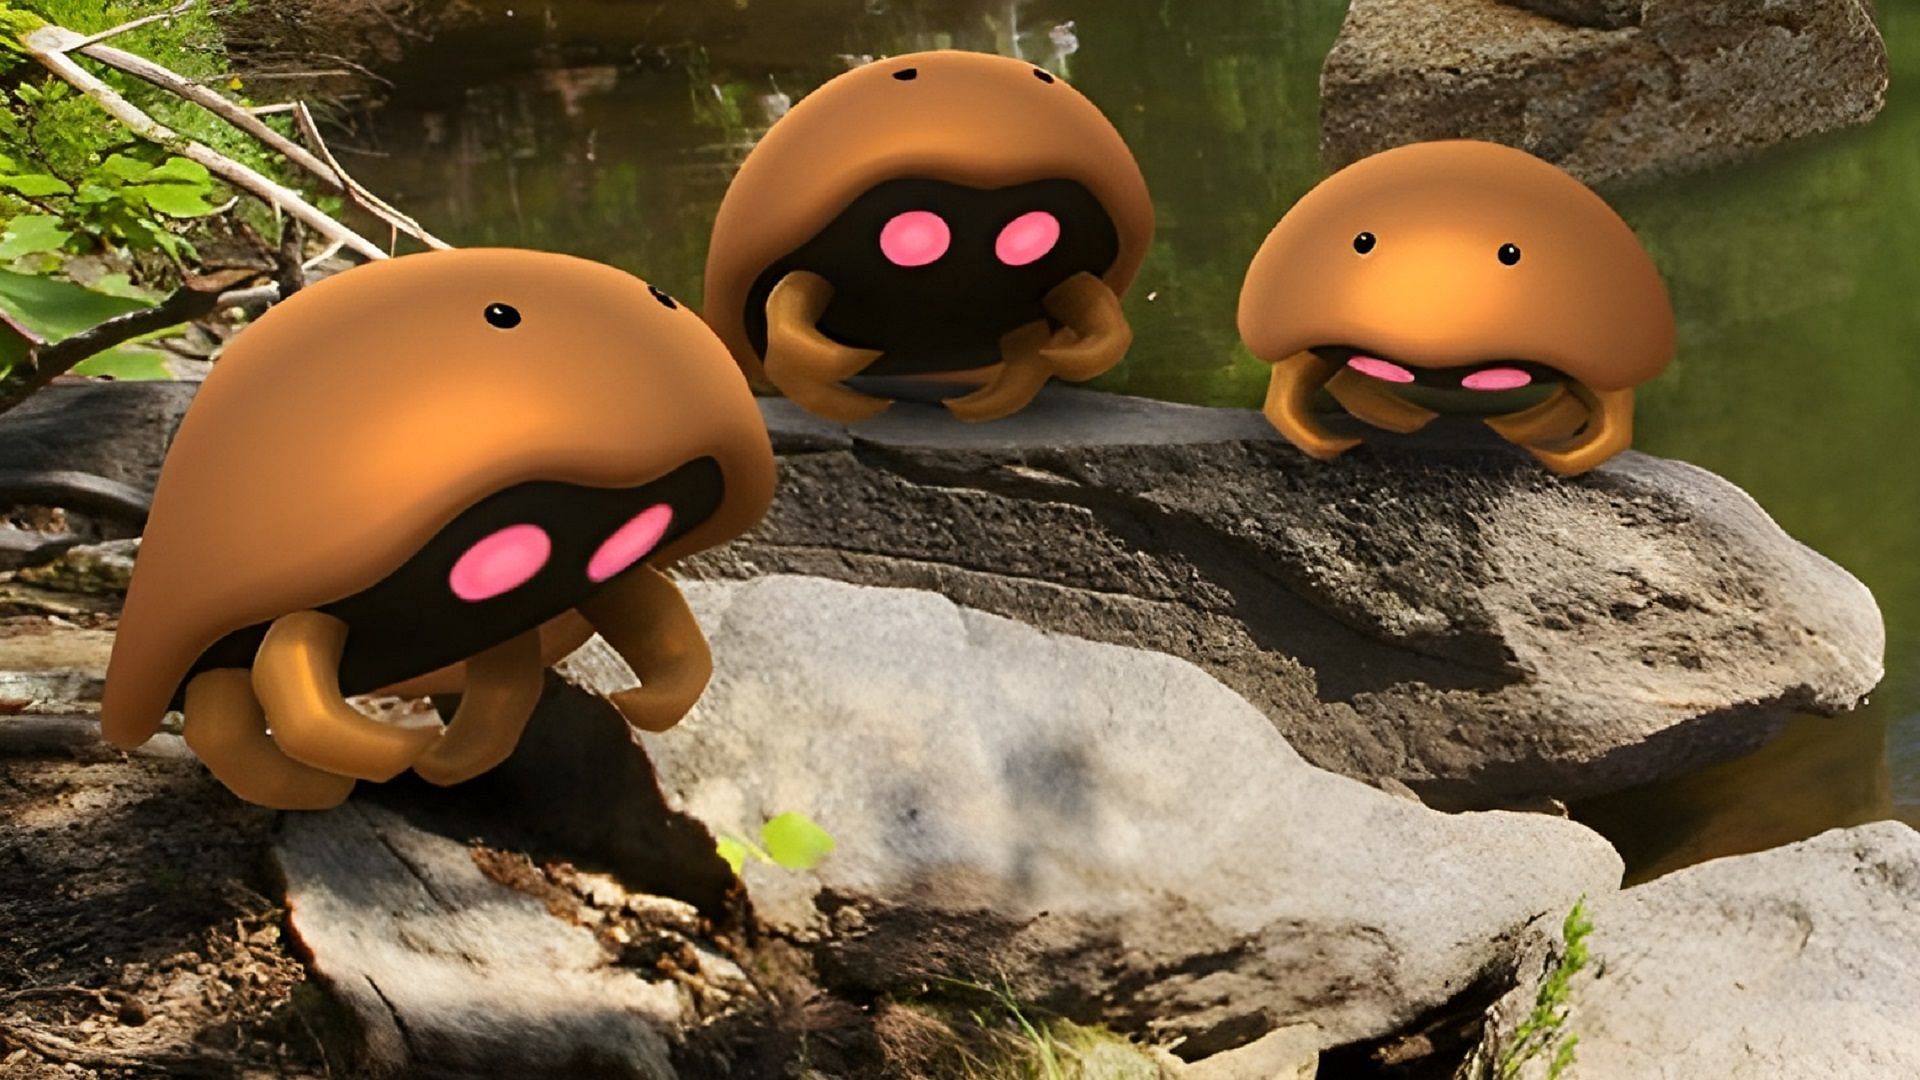 Kabuto is the Pokedle Classic answer for March 28 (Image via The Pokemon Company)